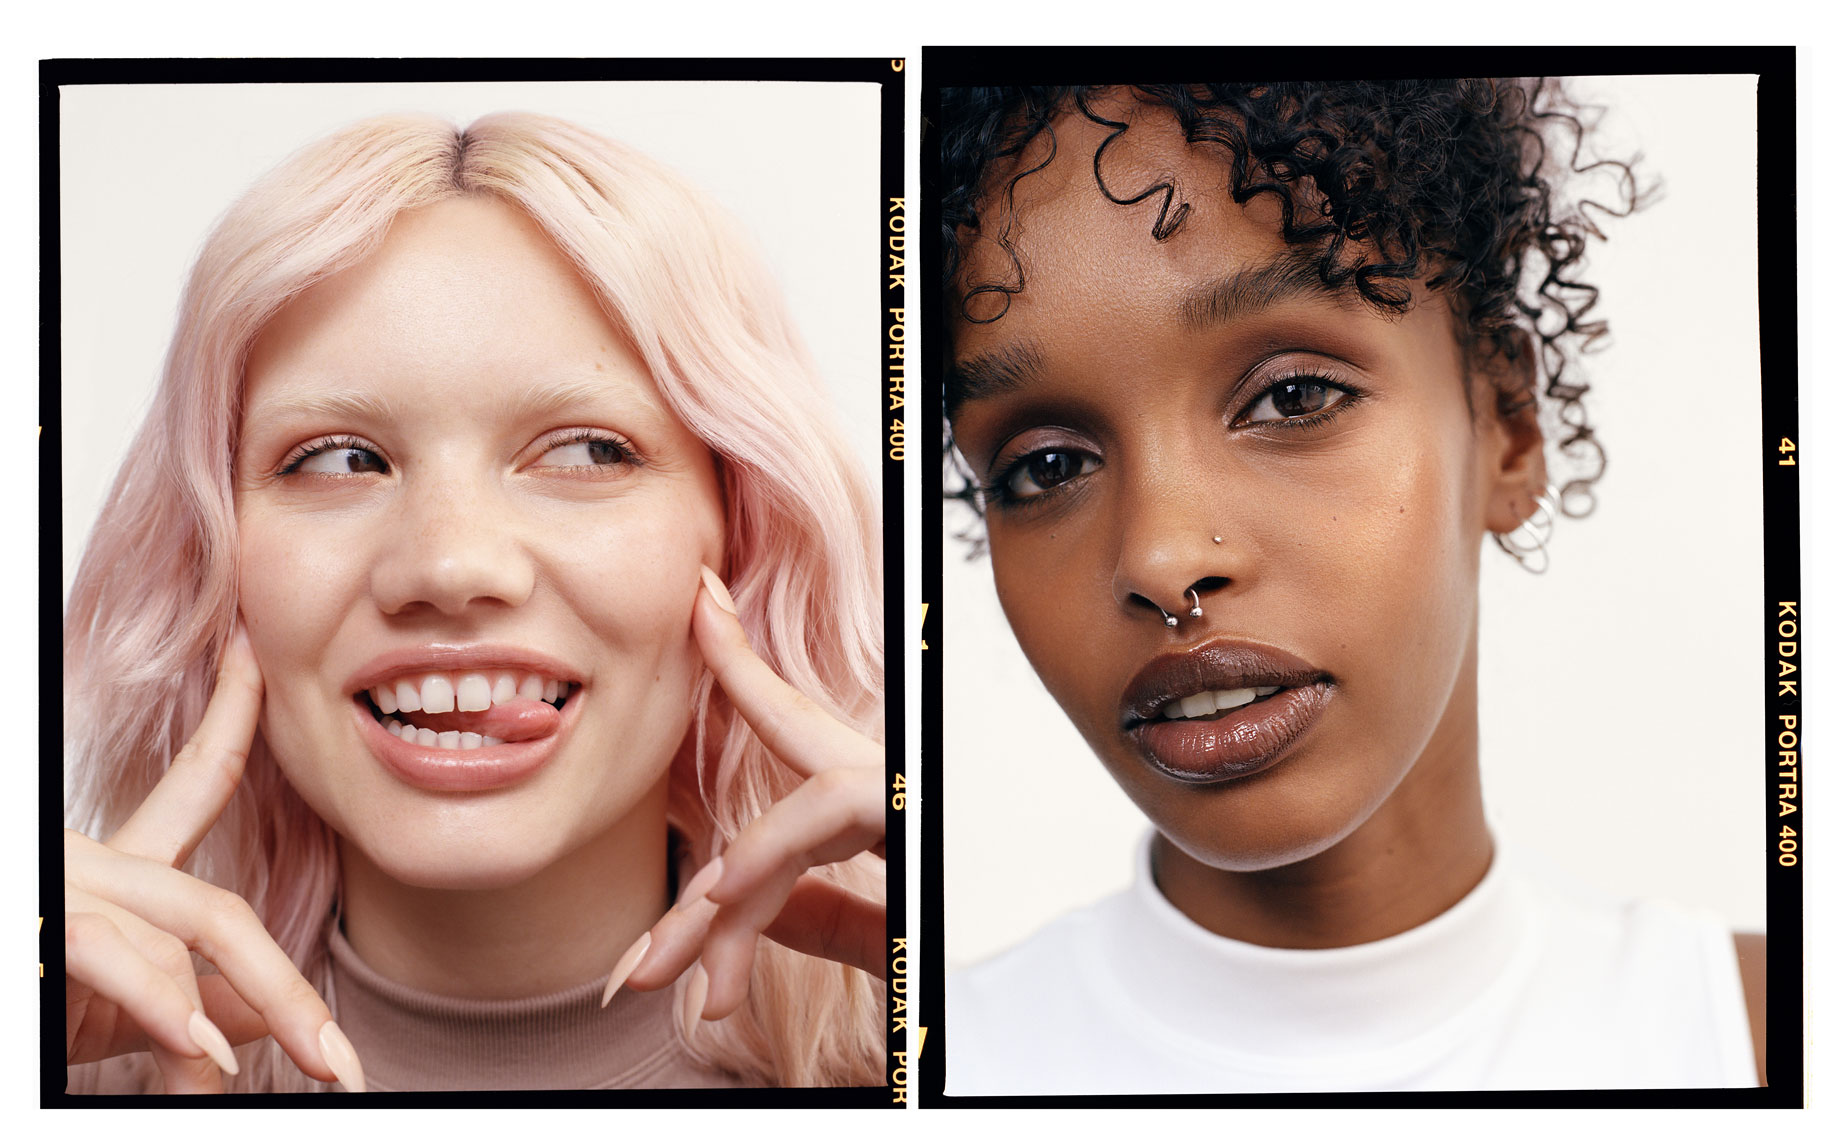 issie-gibbons-fashion-stylist-primark-beauty-campaign-skincare-smiley-curls